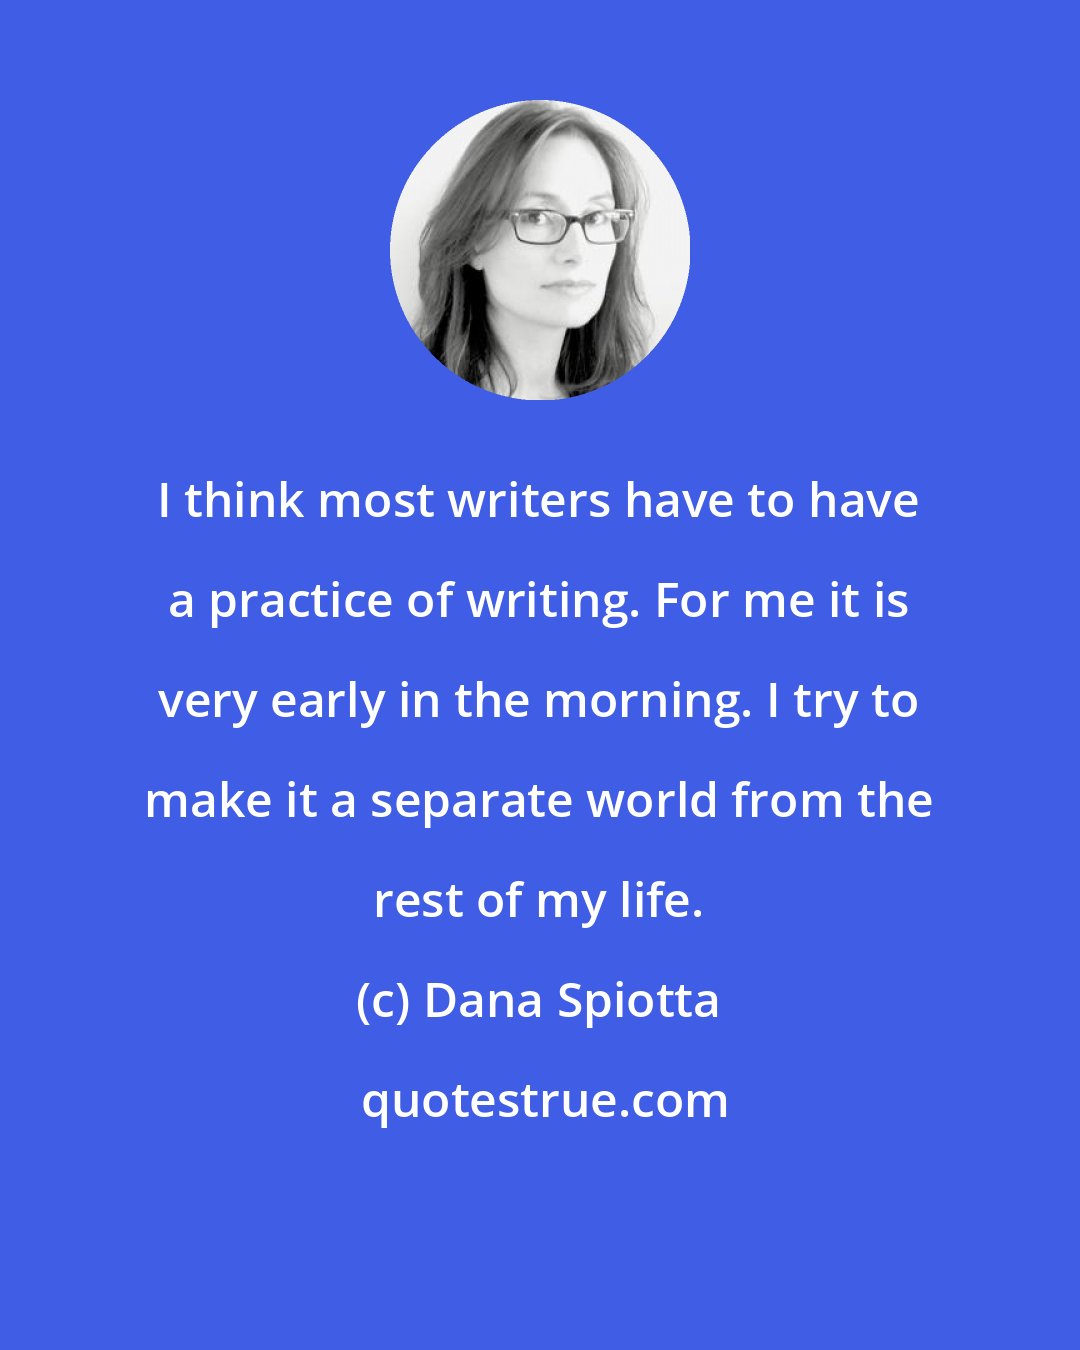 Dana Spiotta: I think most writers have to have a practice of writing. For me it is very early in the morning. I try to make it a separate world from the rest of my life.